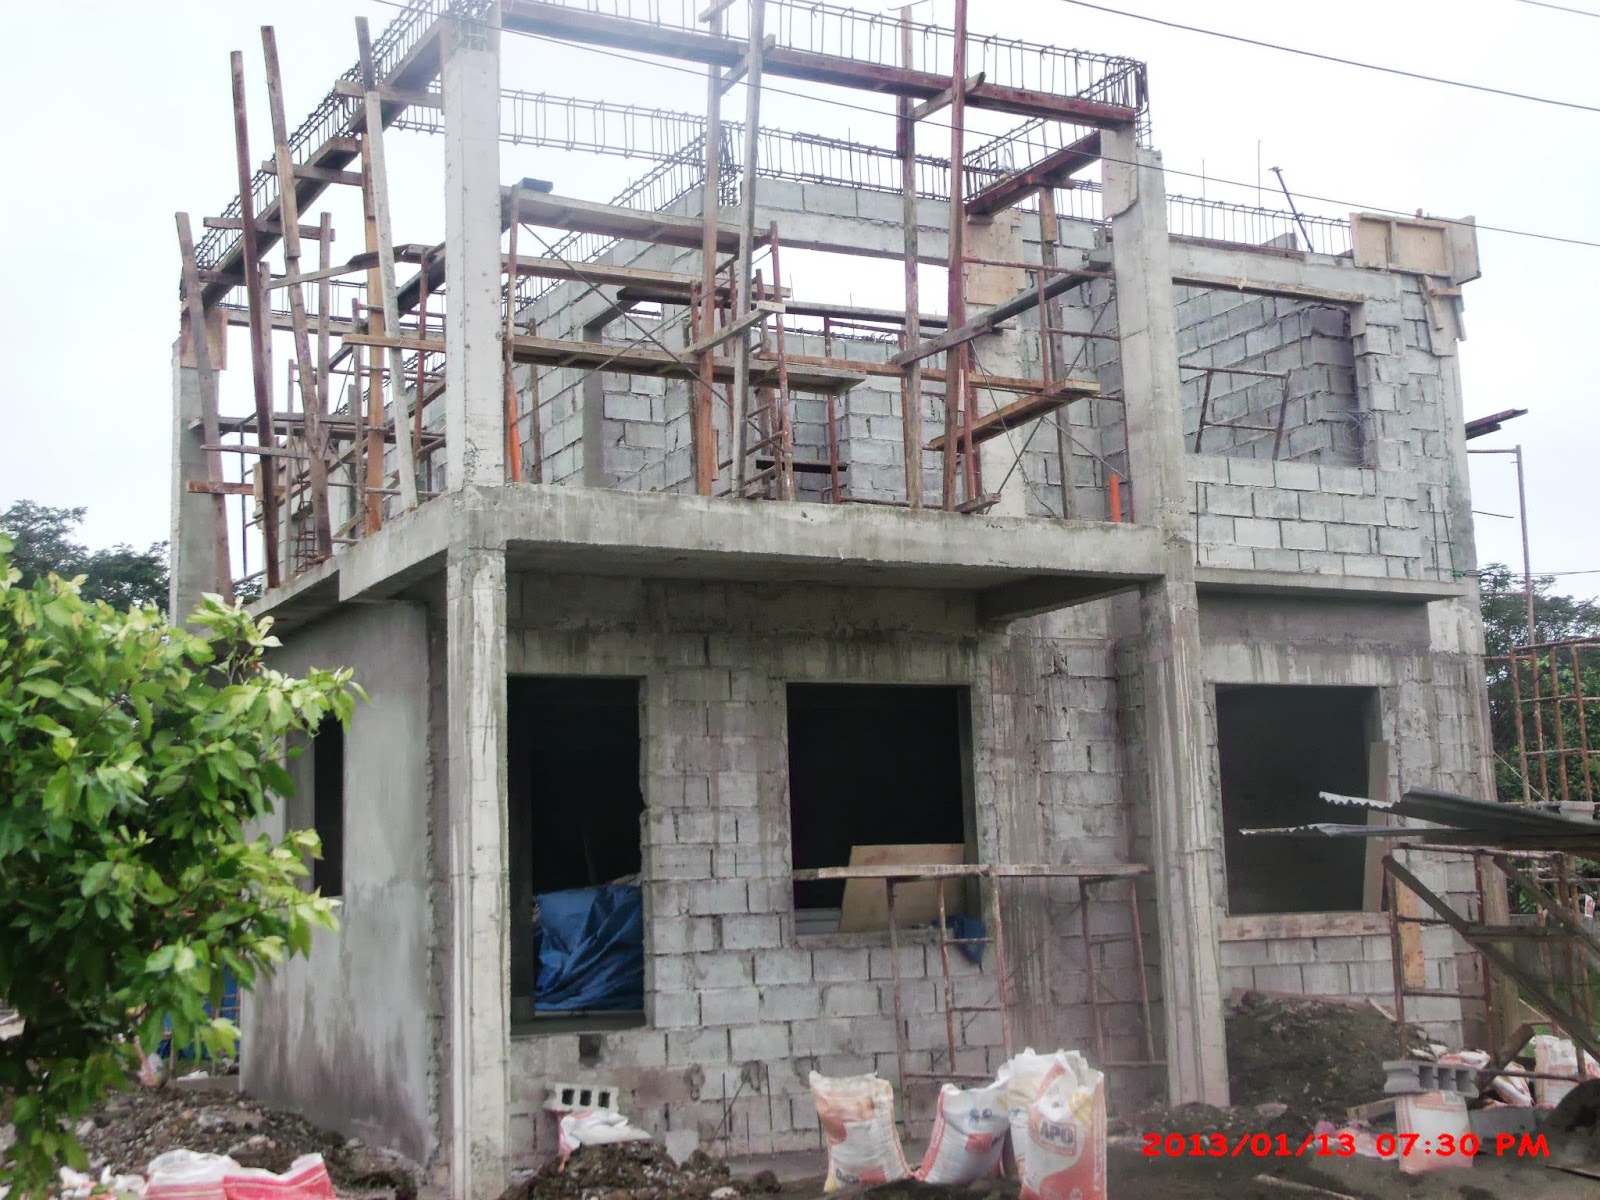 House Construction House Construction Philippines